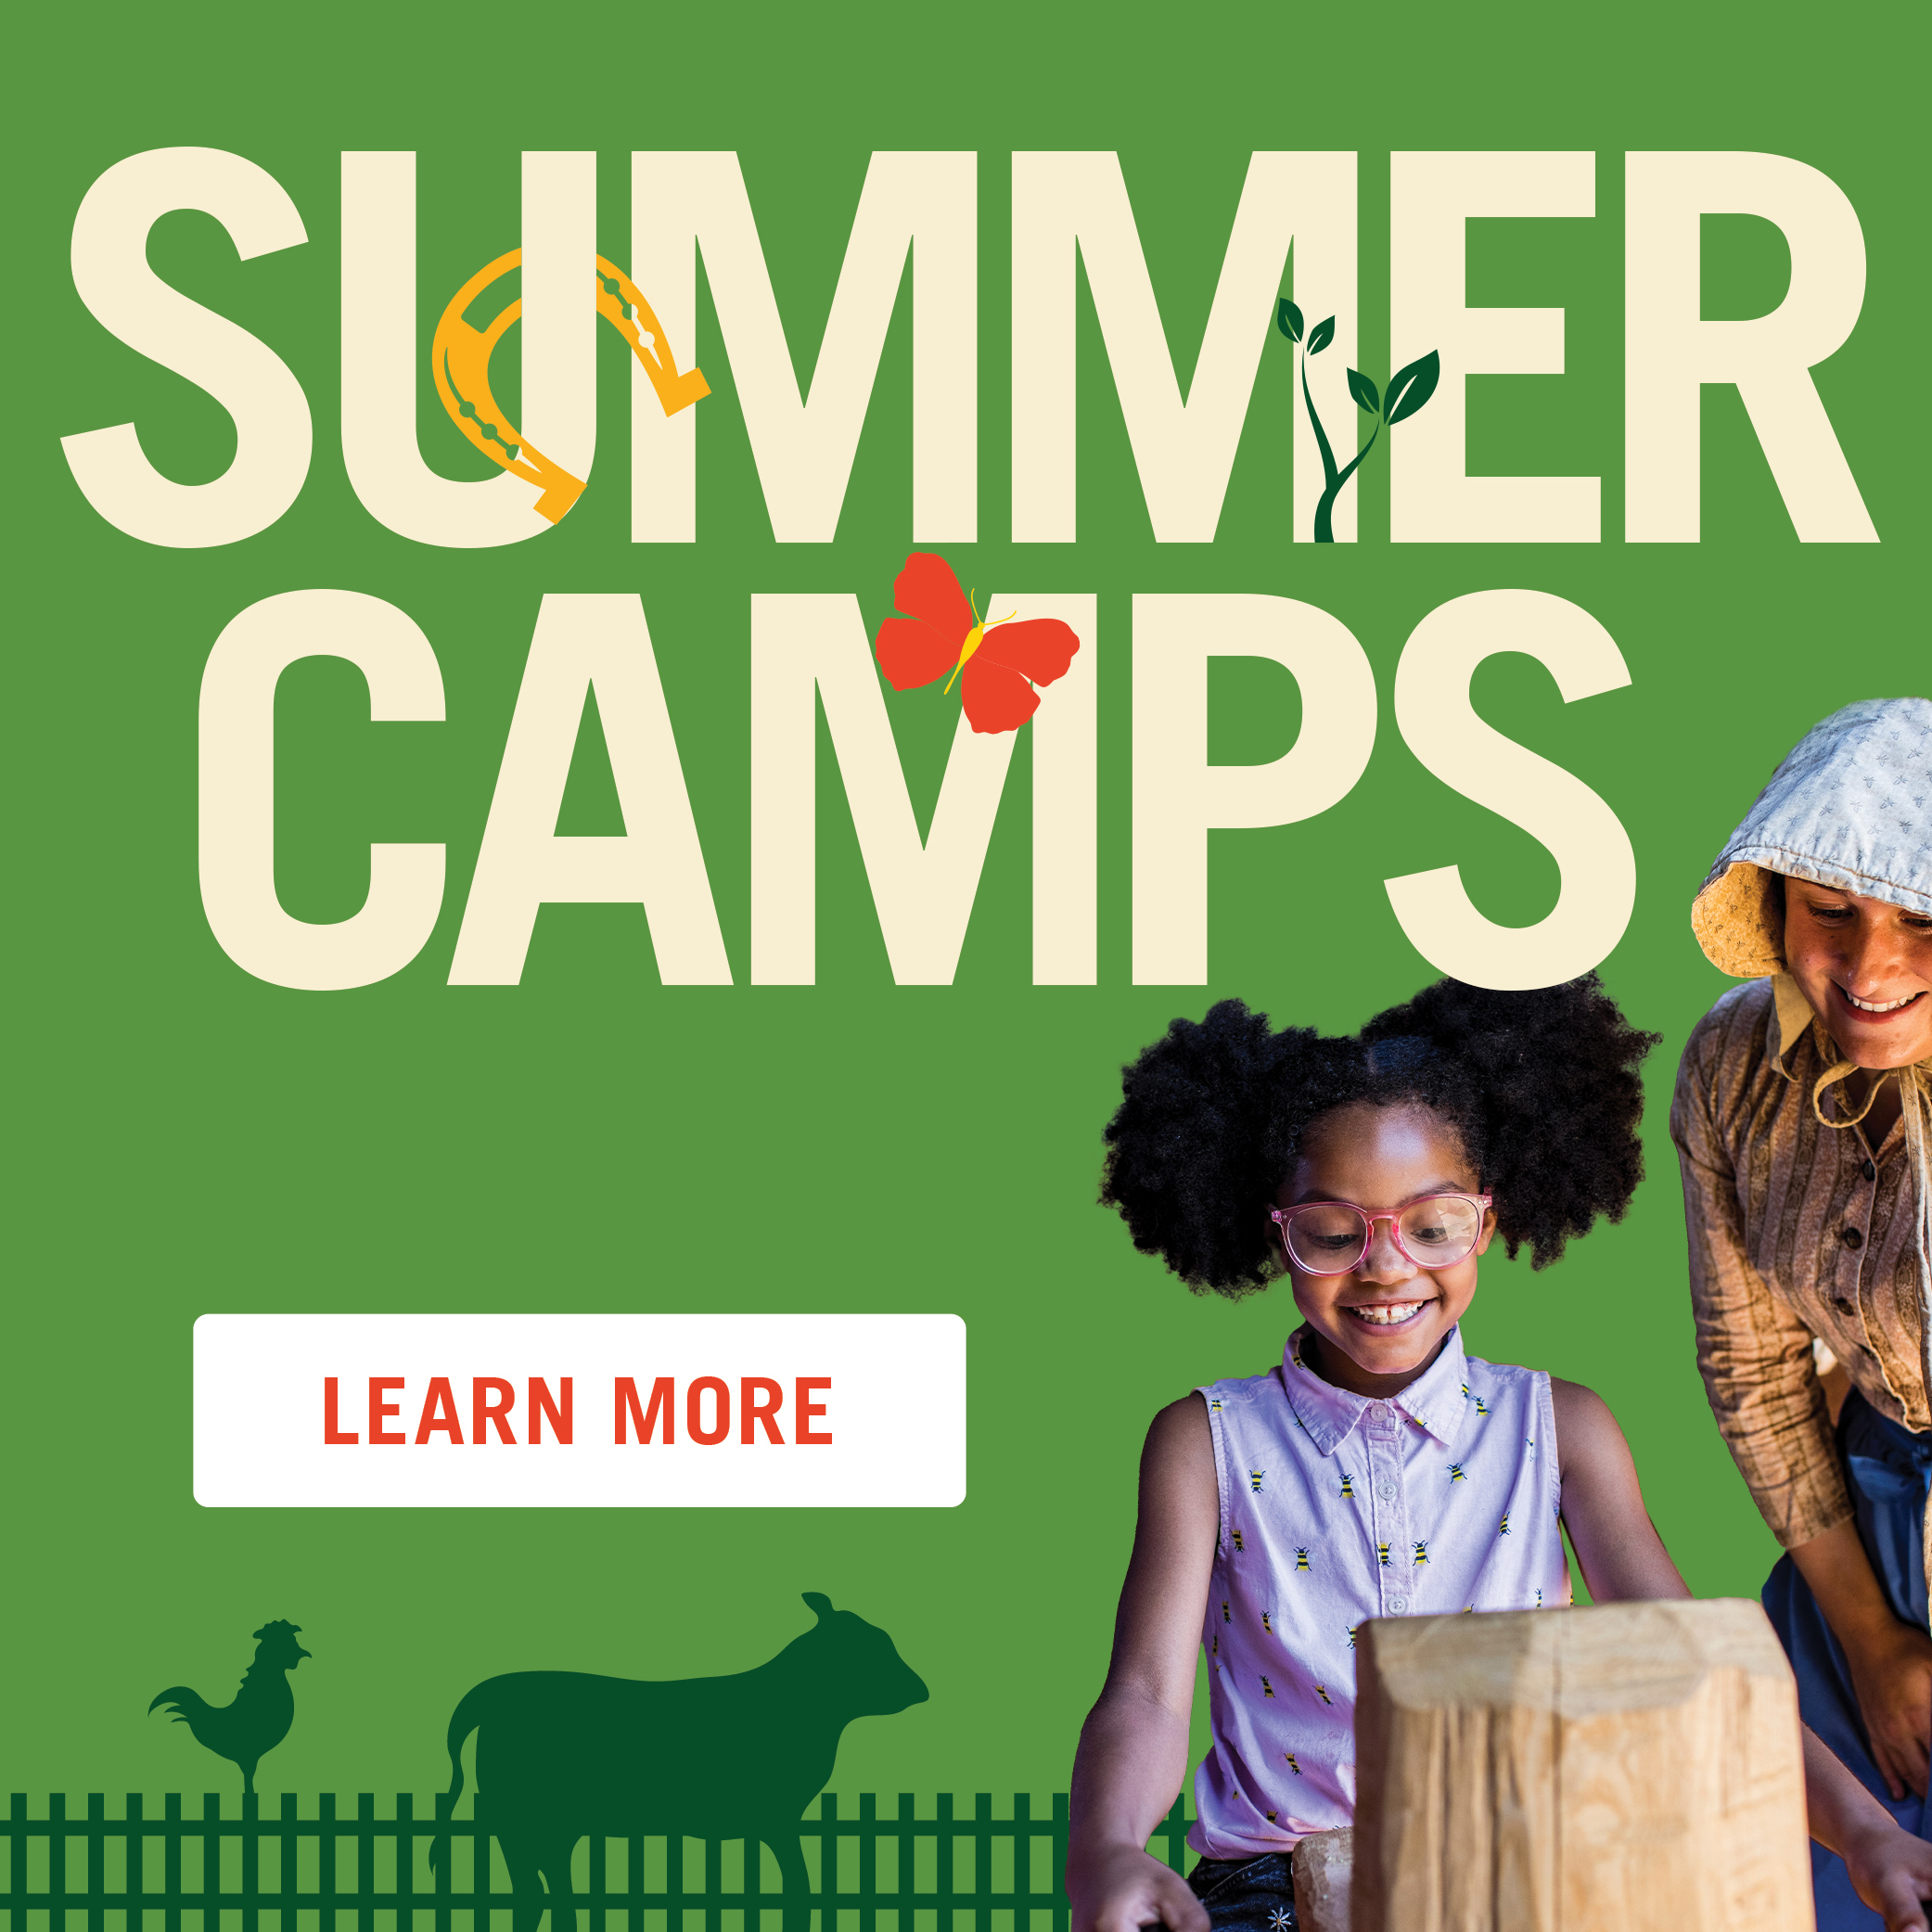 Join us for summer camps, sign up today!